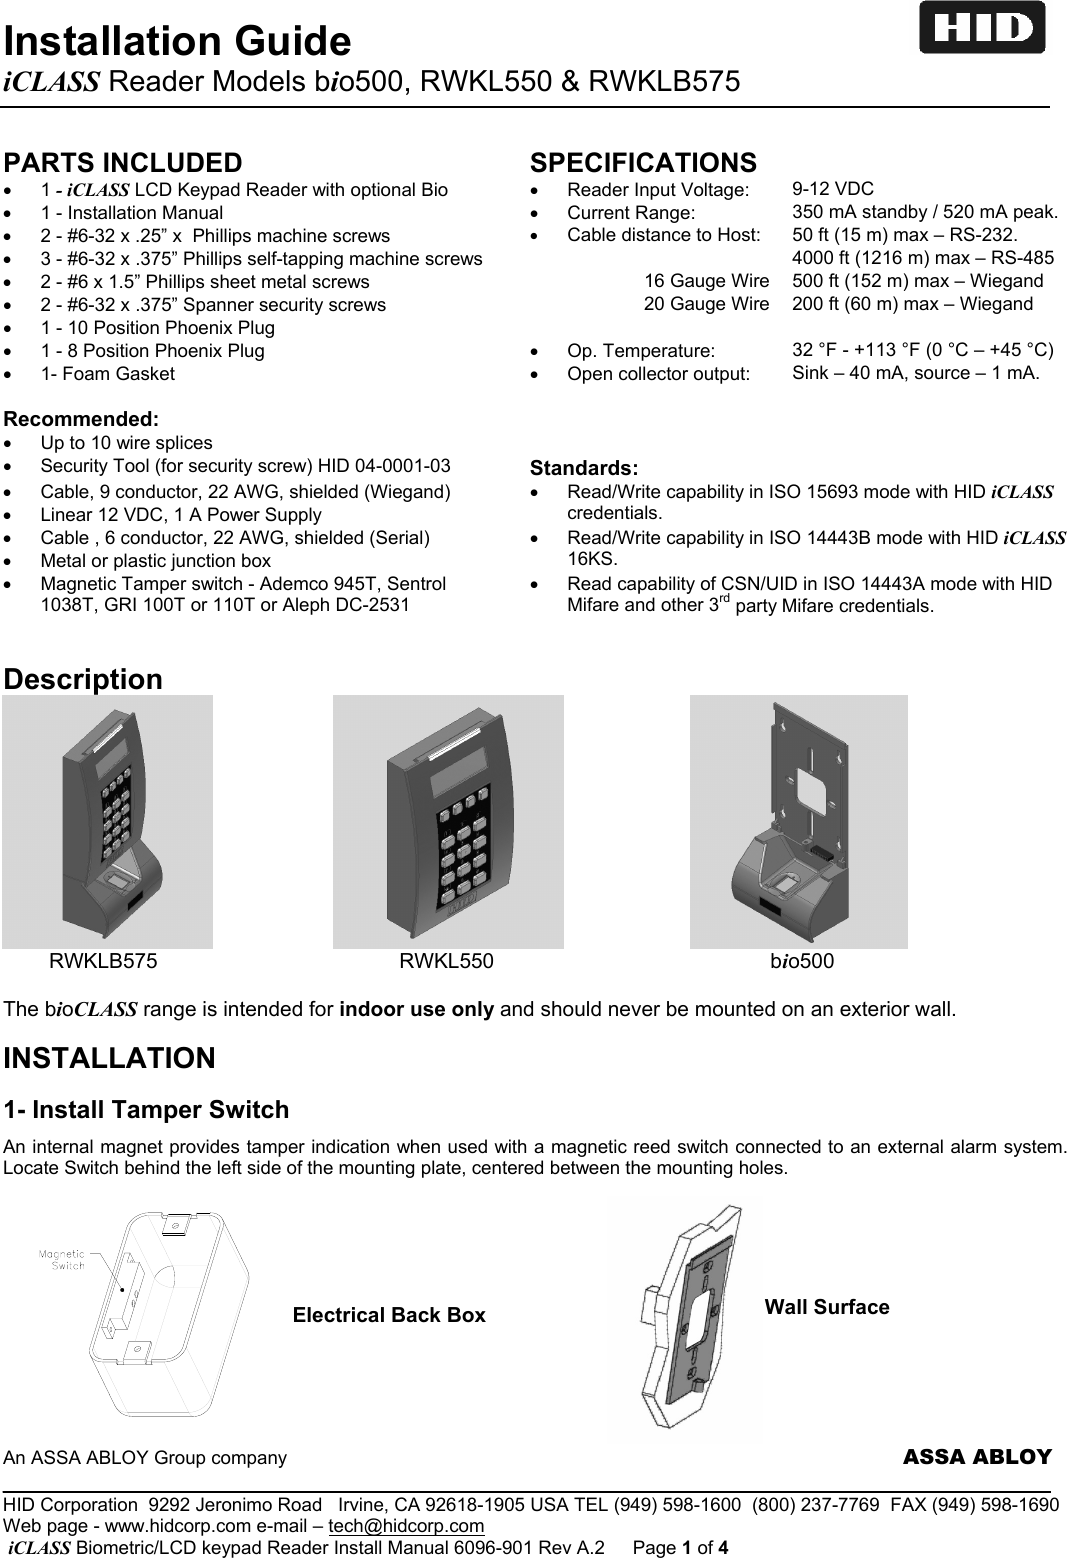 Installation Guide       iCLASS Reader Models bio500, RWKL550 &amp; RWKLB575                An ASSA ABLOY Group company                     ASSA ABLOY _____________________________________________________________________________________________________ HID Corporation  9292 Jeronimo Road   Irvine, CA 92618-1905 USA TEL (949) 598-1600  (800) 237-7769  FAX (949) 598-1690 Web page - www.hidcorp.com e-mail – tech@hidcorp.com  iCLASS Biometric/LCD keypad Reader Install Manual 6096-901 Rev A.2  Page 1 of 4 PARTS INCLUDED SPECIFICATIONS • 1 - iCLASS LCD Keypad Reader with optional Bio  •  Reader Input Voltage:        9-12 VDC  •  1 - Installation Manual  •  Current Range:                  350 mA standby / 520 mA peak. •  2 - #6-32 x .25” x  Phillips machine screws  • Cable distance to Host:     50 ft (15 m) max – RS-232. •  3 - #6-32 x .375” Phillips self-tapping machine screws     4000 ft (1216 m) max – RS-485 •  2 - #6 x 1.5” Phillips sheet metal screws   16 Gauge Wire  500 ft (152 m) max – Wiegand •  2 - #6-32 x .375” Spanner security screws   20 Gauge Wire  200 ft (60 m) max – Wiegand •  1 - 10 Position Phoenix Plug    •  1 - 8 Position Phoenix Plug  •  Op. Temperature:            32 °F - +113 °F (0 °C – +45 °C) •  1- Foam Gasket  •  Open collector output:  Sink – 40 mA, source – 1 mA.    Recommended:    •  Up to 10 wire splices •  Security Tool (for security screw) HID 04-0001-03  Standards:  •  Cable, 9 conductor, 22 AWG, shielded (Wiegand) •  Linear 12 VDC, 1 A Power Supply •  Read/Write capability in ISO 15693 mode with HID iCLASS credentials. •  Cable , 6 conductor, 22 AWG, shielded (Serial) •  Metal or plastic junction box •  Read/Write capability in ISO 14443B mode with HID iCLASS 16KS. •  Magnetic Tamper switch - Ademco 945T, Sentrol 1038T, GRI 100T or 110T or Aleph DC-2531 •  Read capability of CSN/UID in ISO 14443A mode with HID Mifare and other 3rd party Mifare credentials.  Description                                                       RWKLB575                                          RWKL550                                                bio500   The bioCLASS range is intended for indoor use only and should never be mounted on an exterior wall.  INSTALLATION   1- Install Tamper Switch An internal magnet provides tamper indication when used with a magnetic reed switch connected to an external alarm system.  Locate Switch behind the left side of the mounting plate, centered between the mounting holes.                                               Electrical Back Box  Wall Surface 